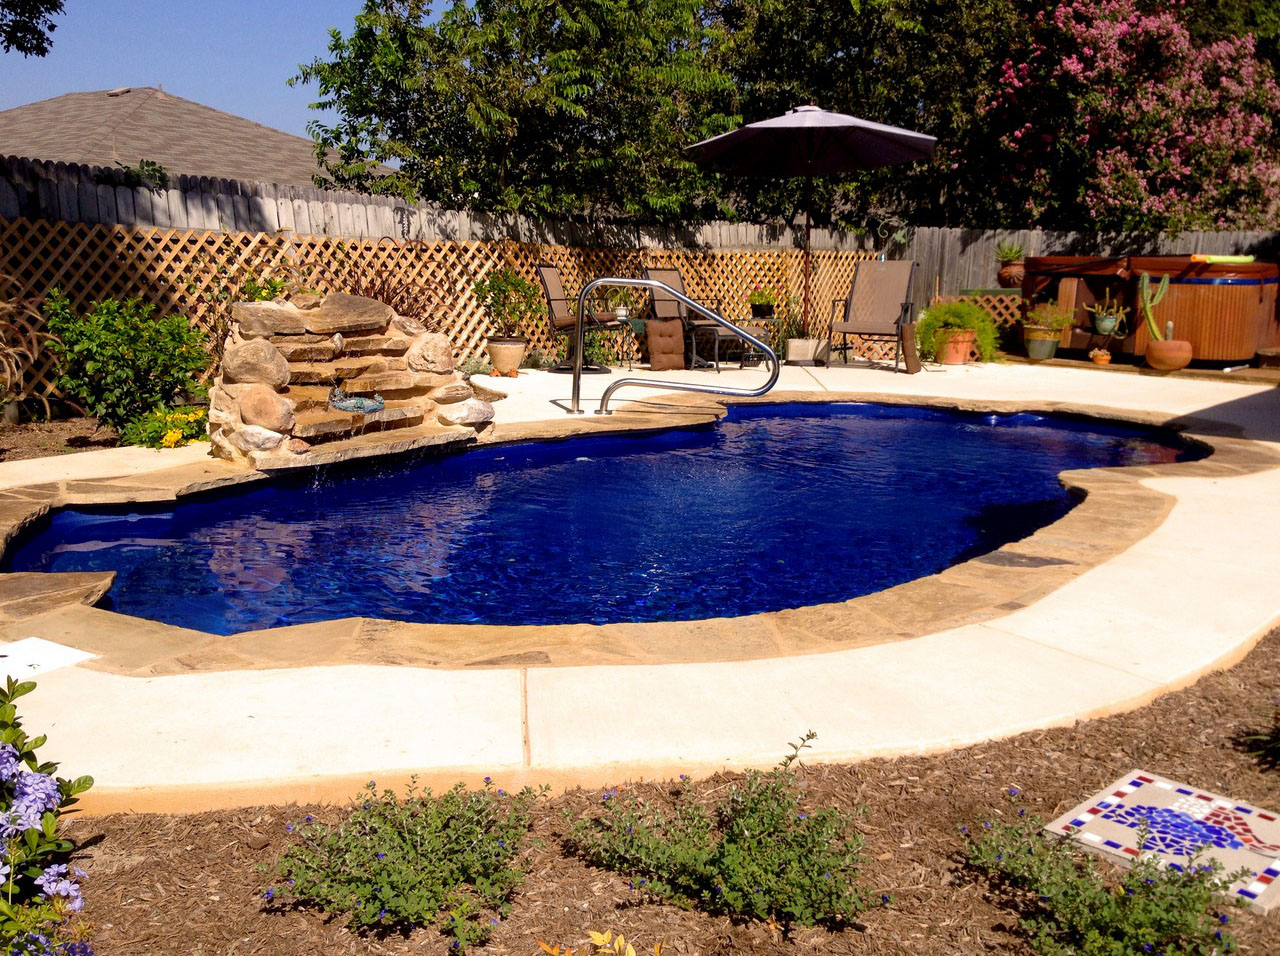 Lonestar Inground Fiberglass Pools Pearsall Texas is a certified swimming pool installer has the knowledge to install your pool accurately